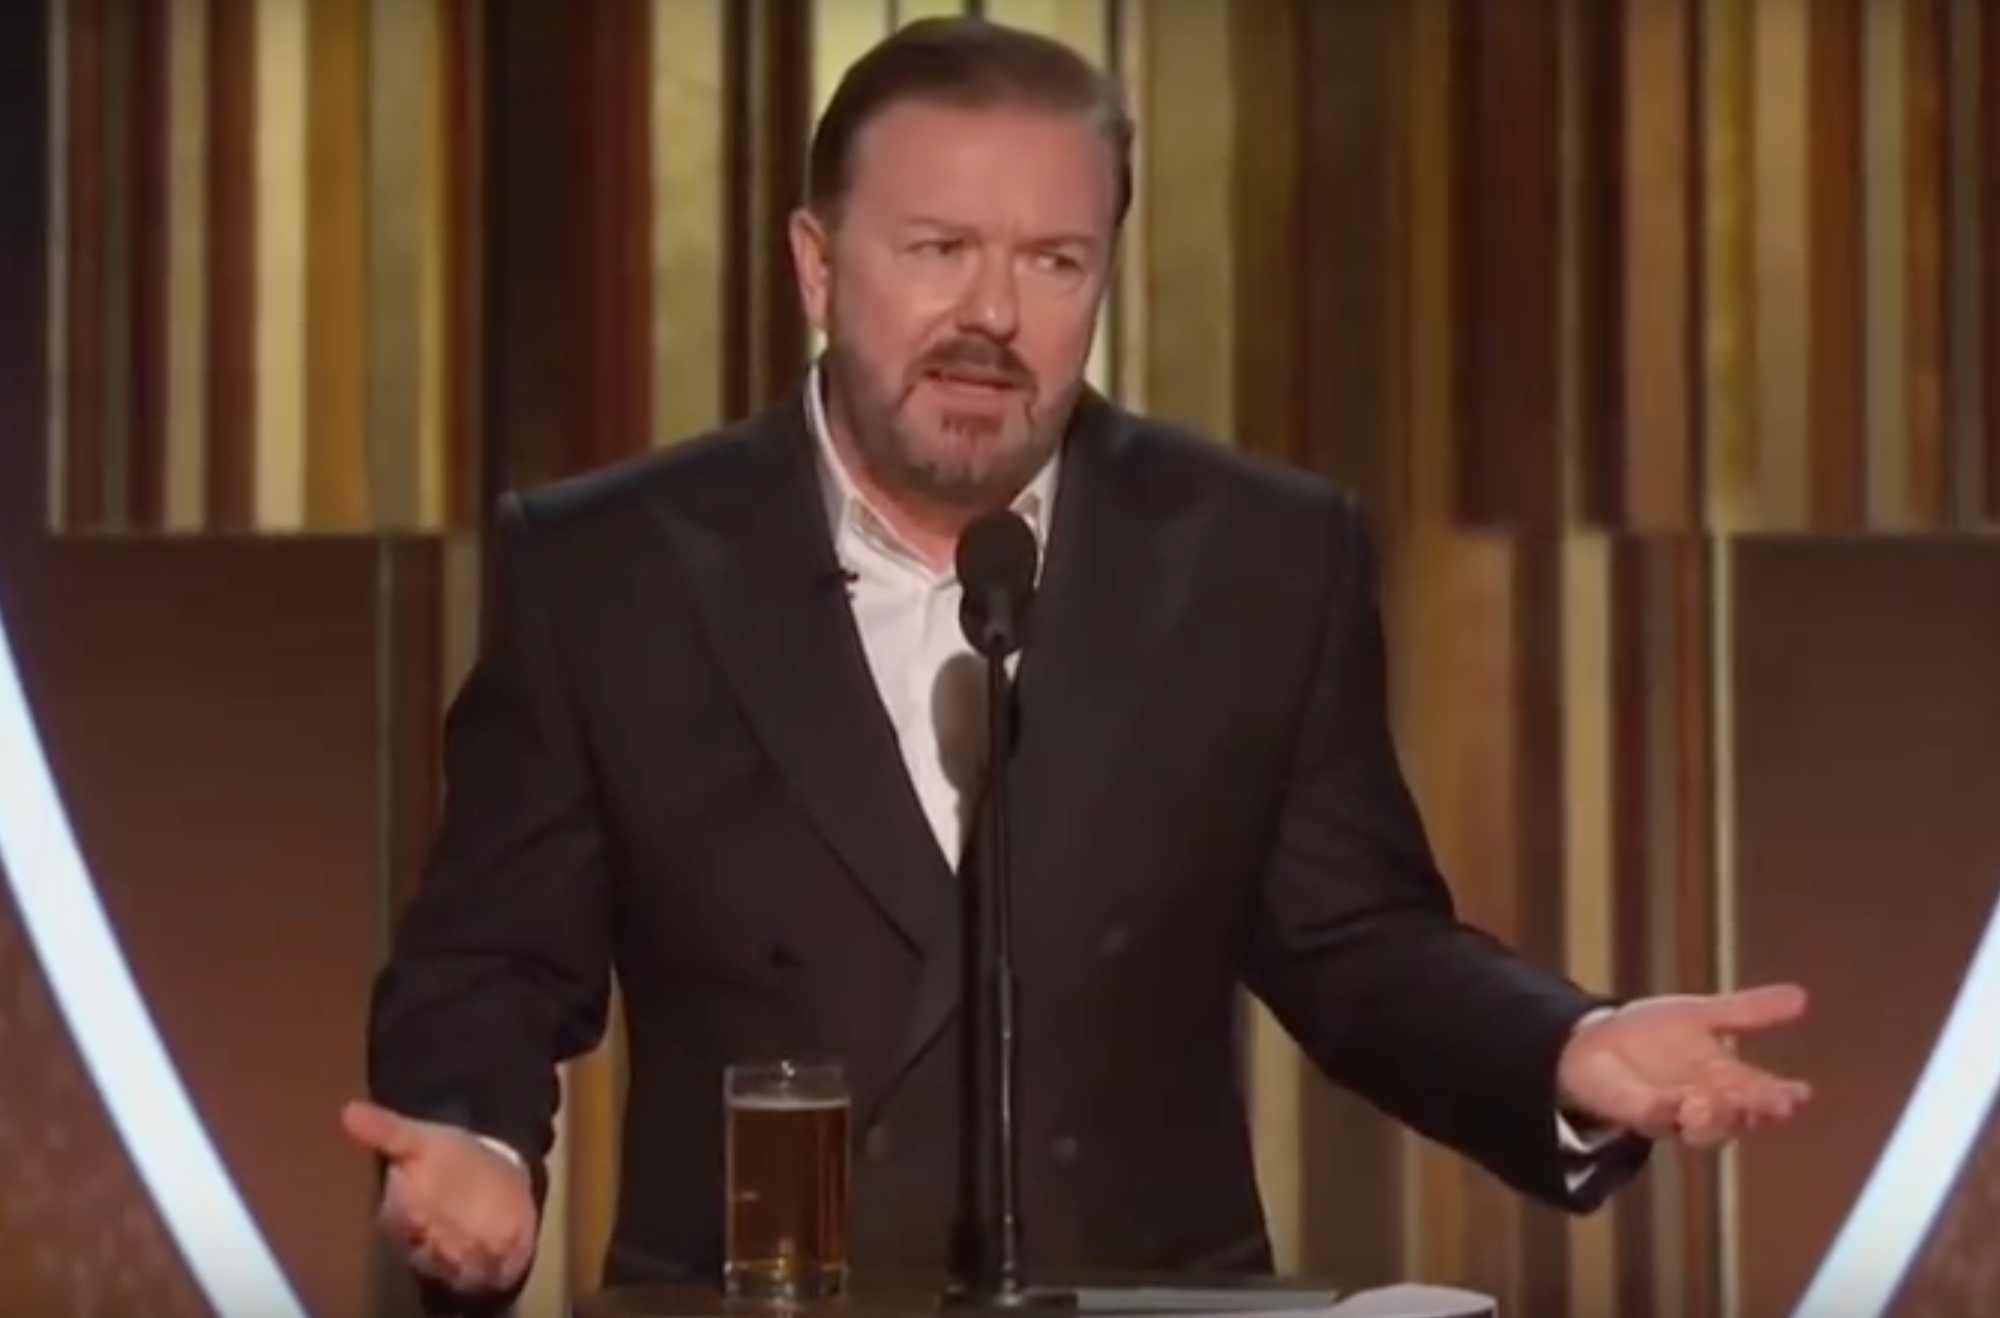 From Epstein To Amazon, Ricky Gervais Torches Hollywood At Golden Globes